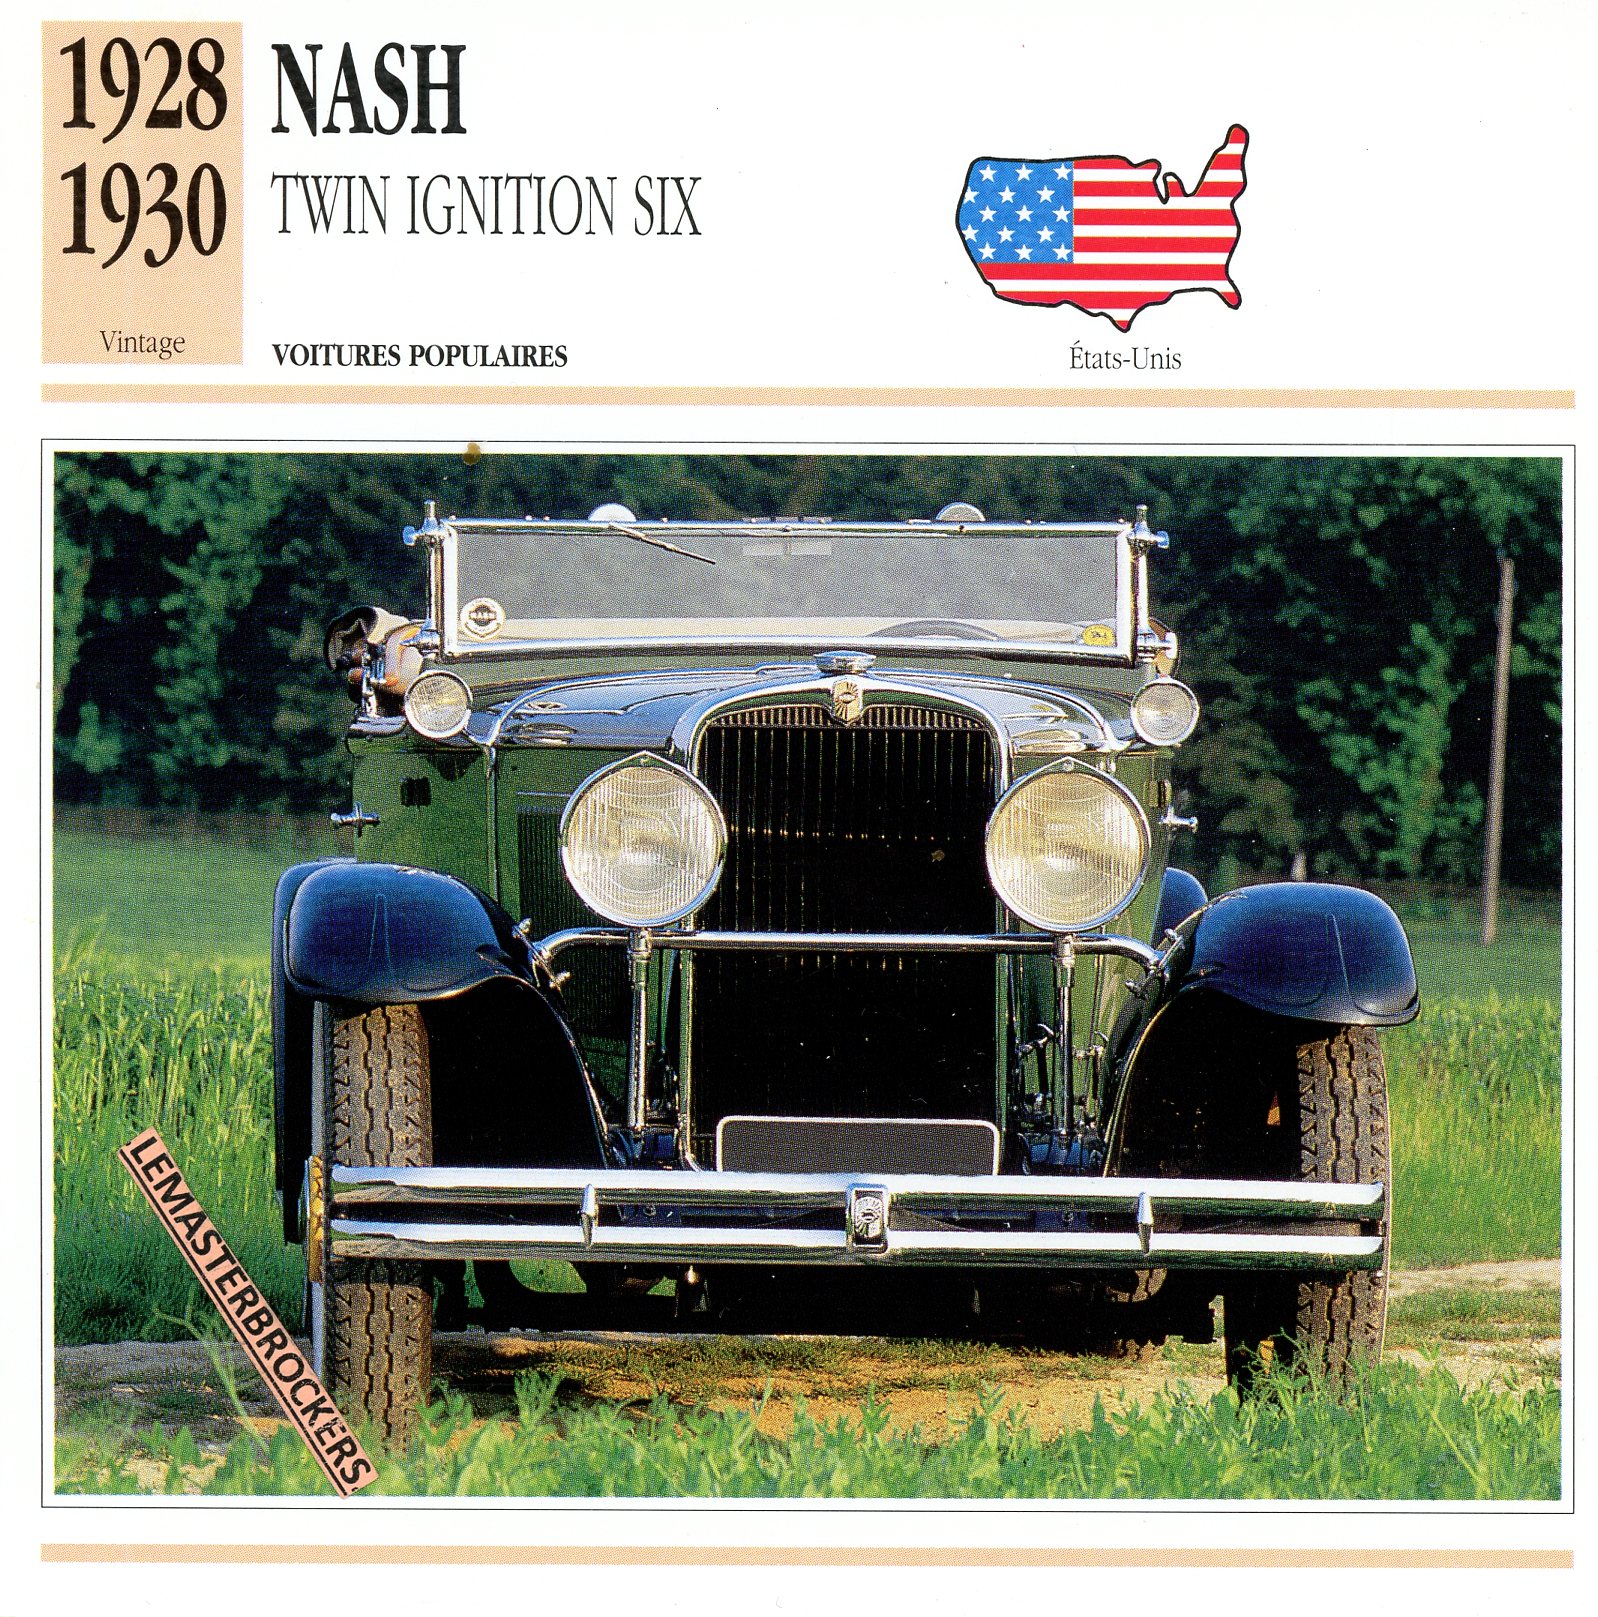 FICHE-AUTO-NASH-TWIN-IGNITION-SIX-1928-1930-LEMASTERBROCKERS-CARS-CARD-ATLAS-EDITION